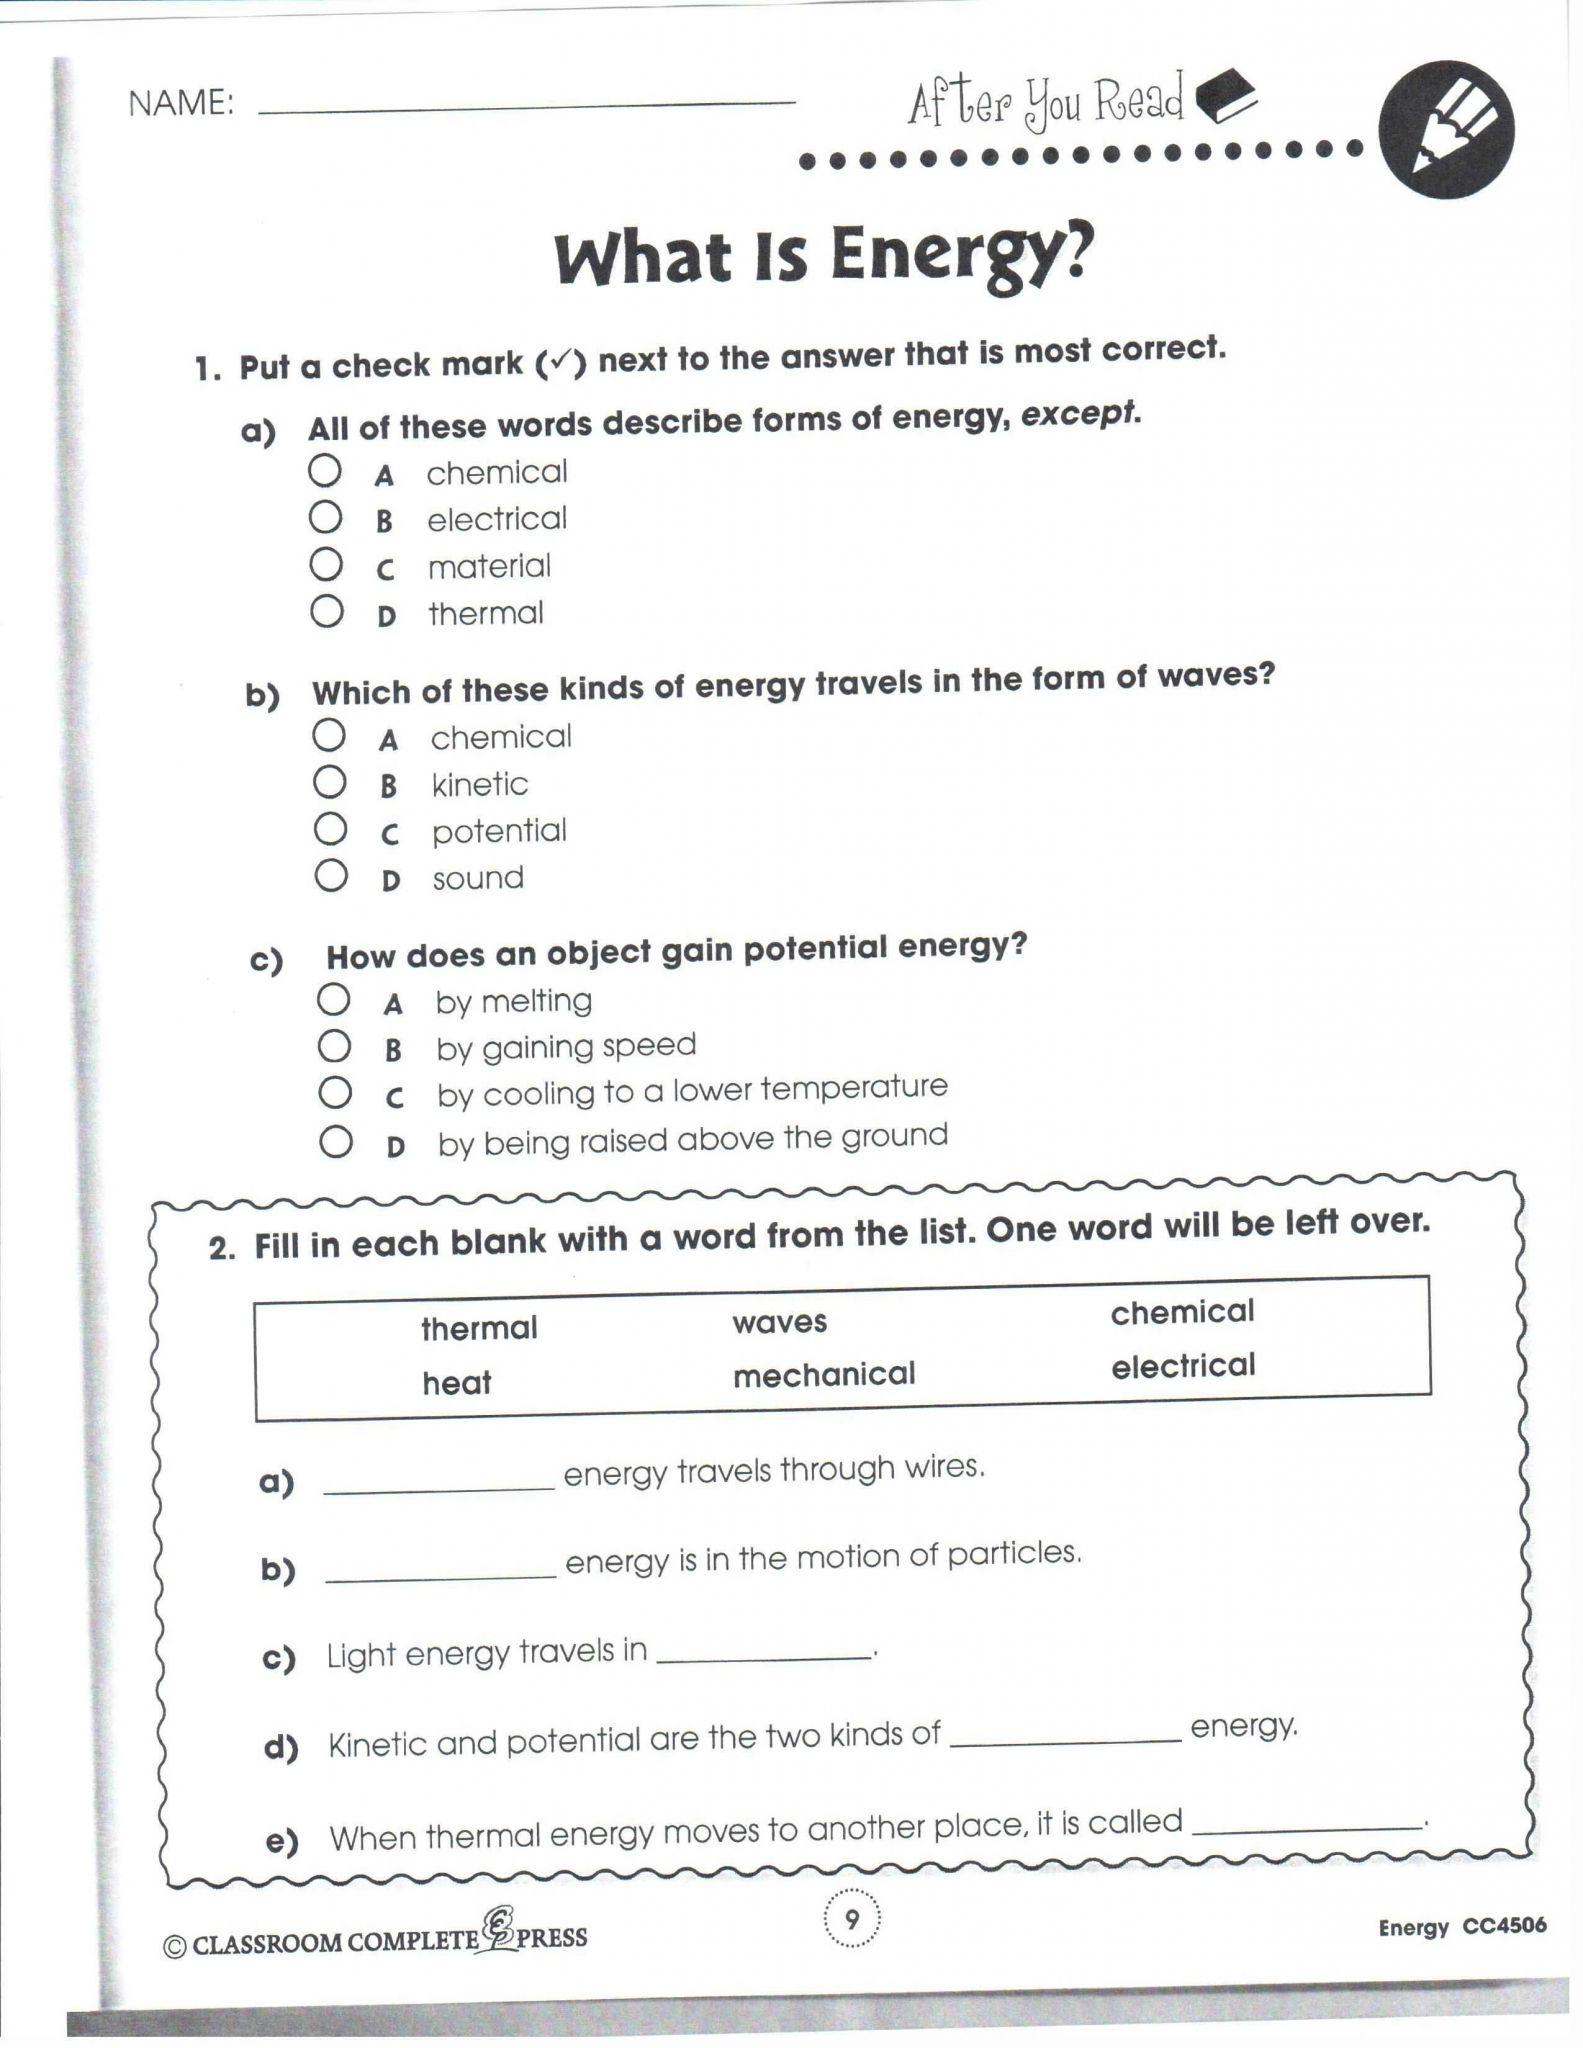 Free Reading Comprehension Worksheets for 3rd Grade with Free Printable Reading Passages